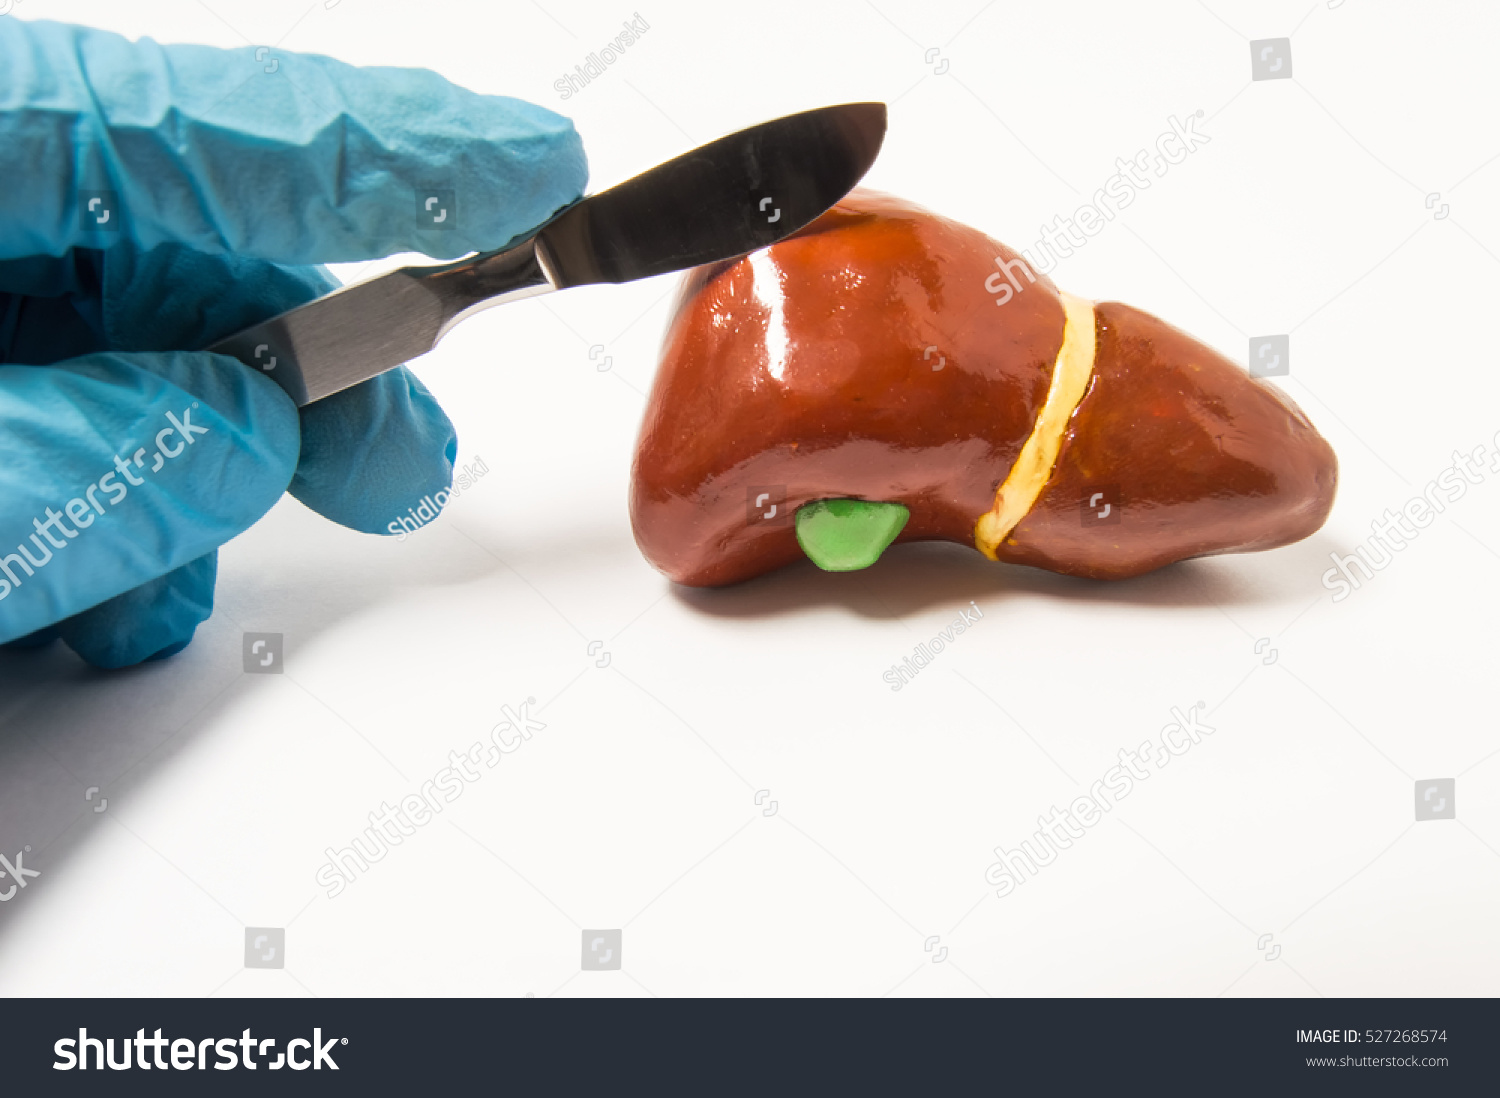 Surgeon's hand in blue latex glove holding scalpel over anatomical figure of human liver. Concept that symbolizes process of surgery treatment of liver diseases such as cancer, hydatid disease ets. #527268574